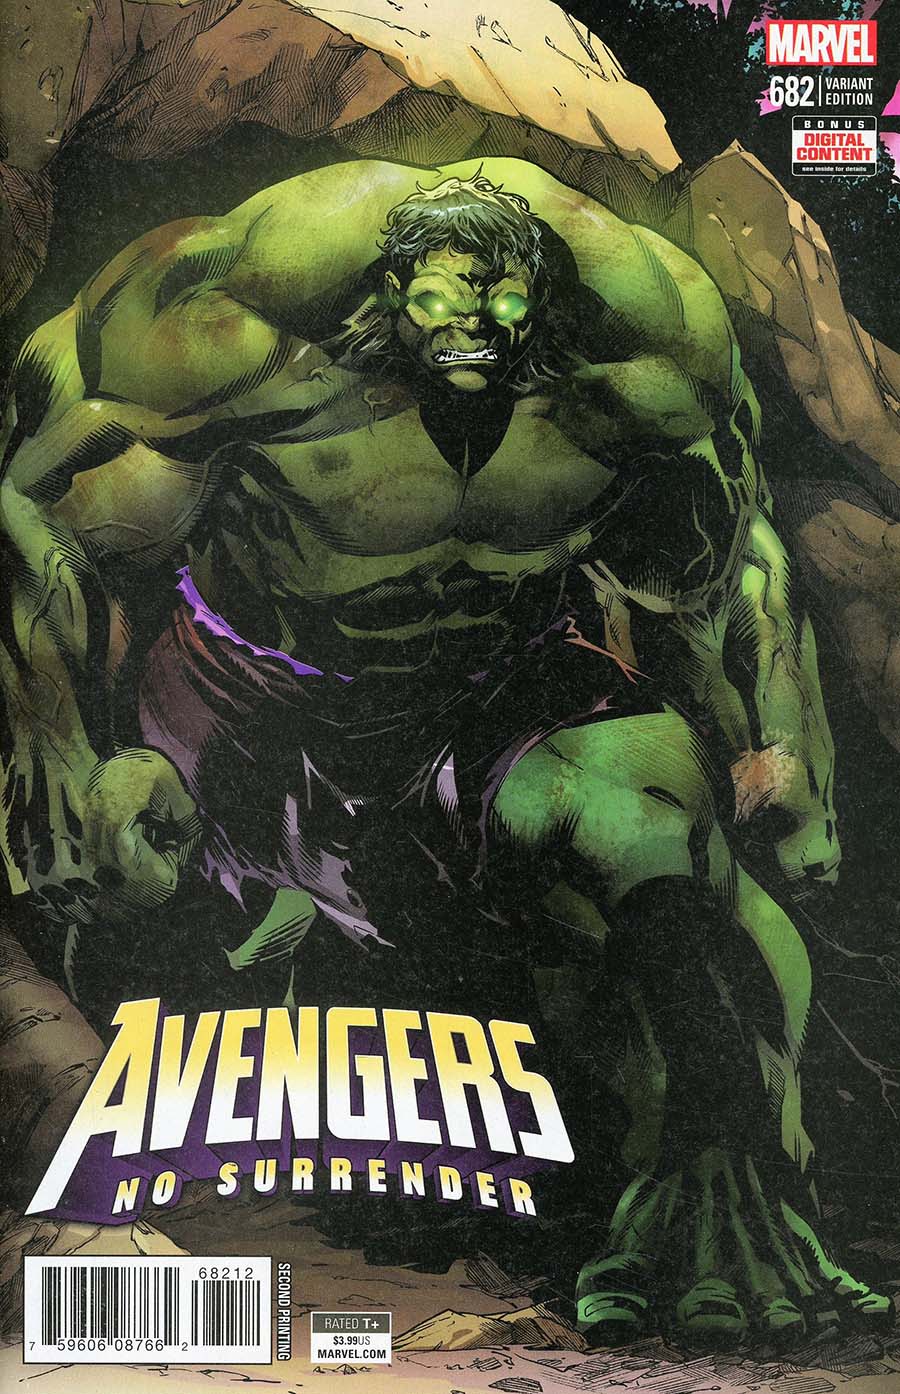 Avengers Vol 6 #682 Cover C 2nd Ptg Variant Sean Izaakse Cover (No Surrender Part 8)(Marvel Legacy Tie-In)